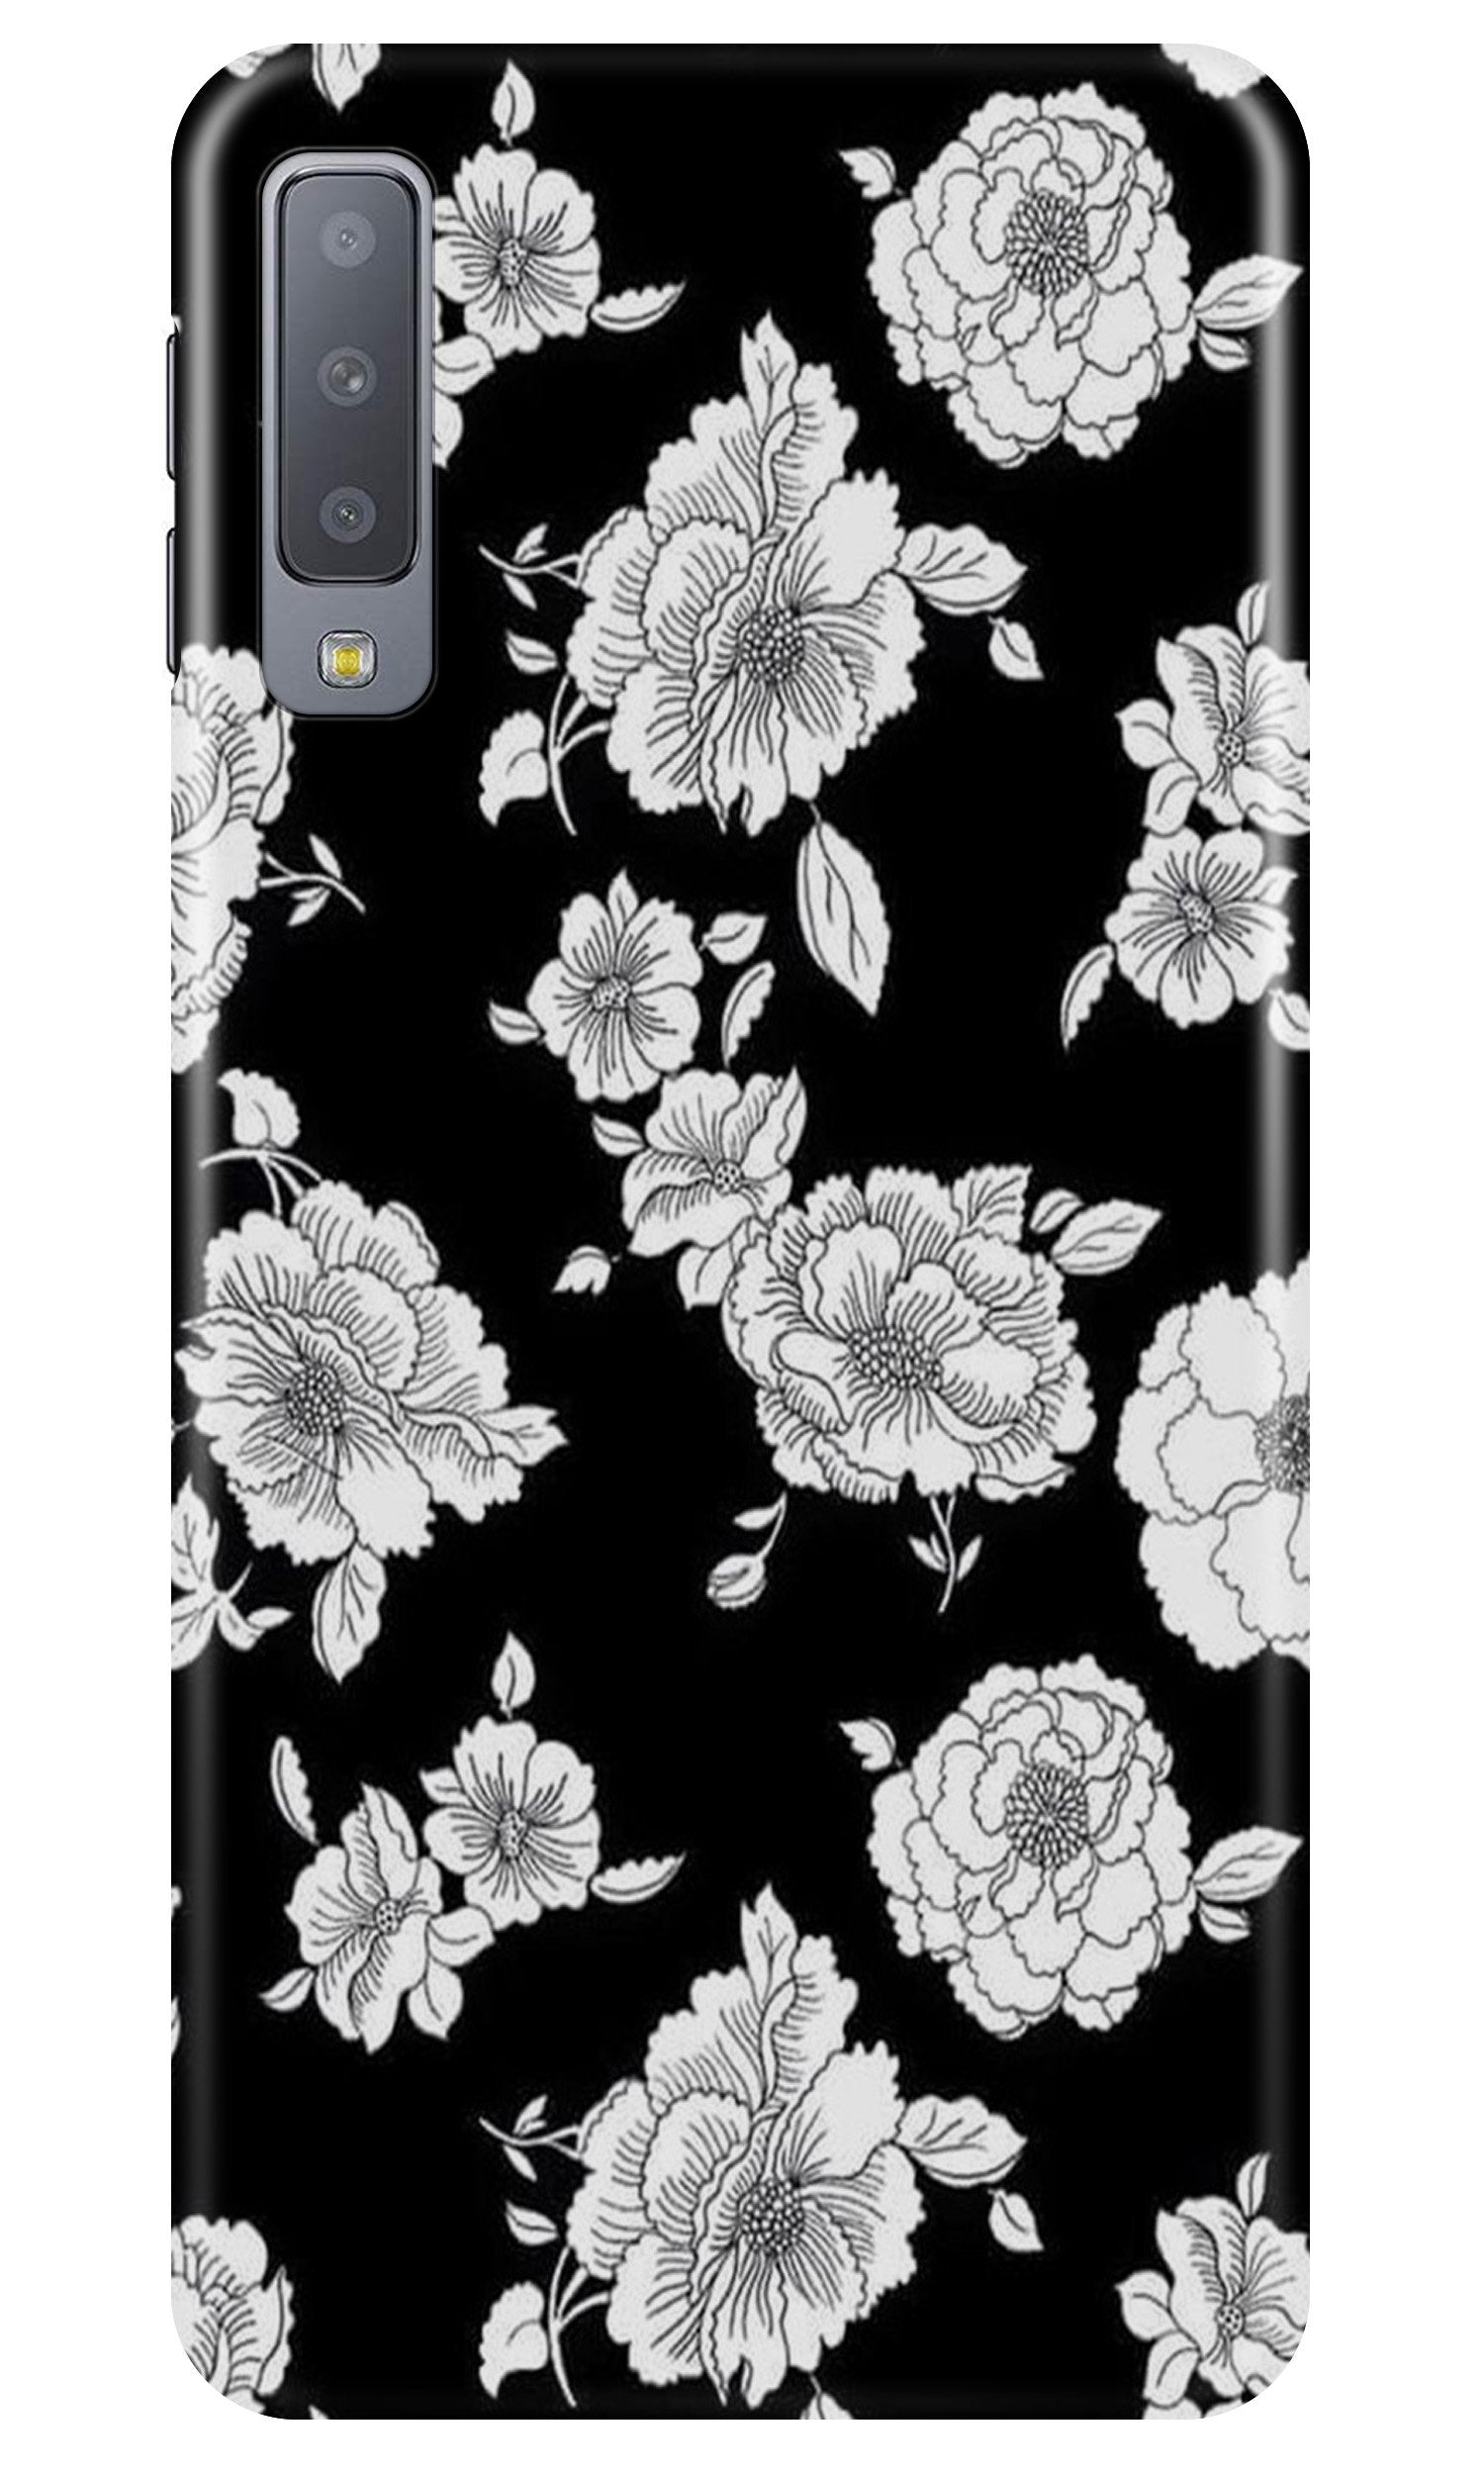 White flowers Black Background Case for Samung Galaxy A70s